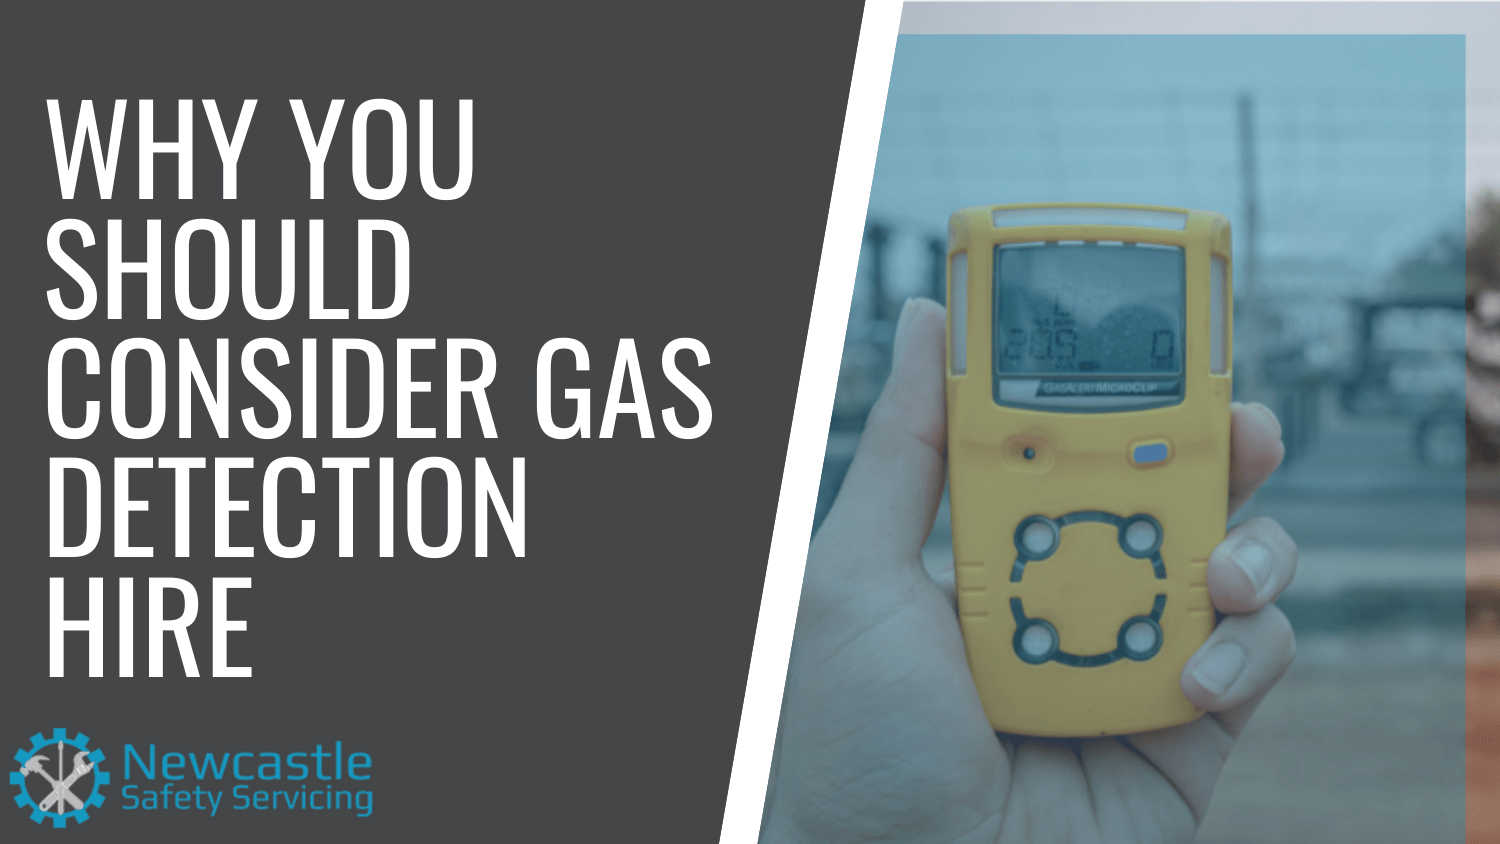 Gas Detection Hire Cover Image